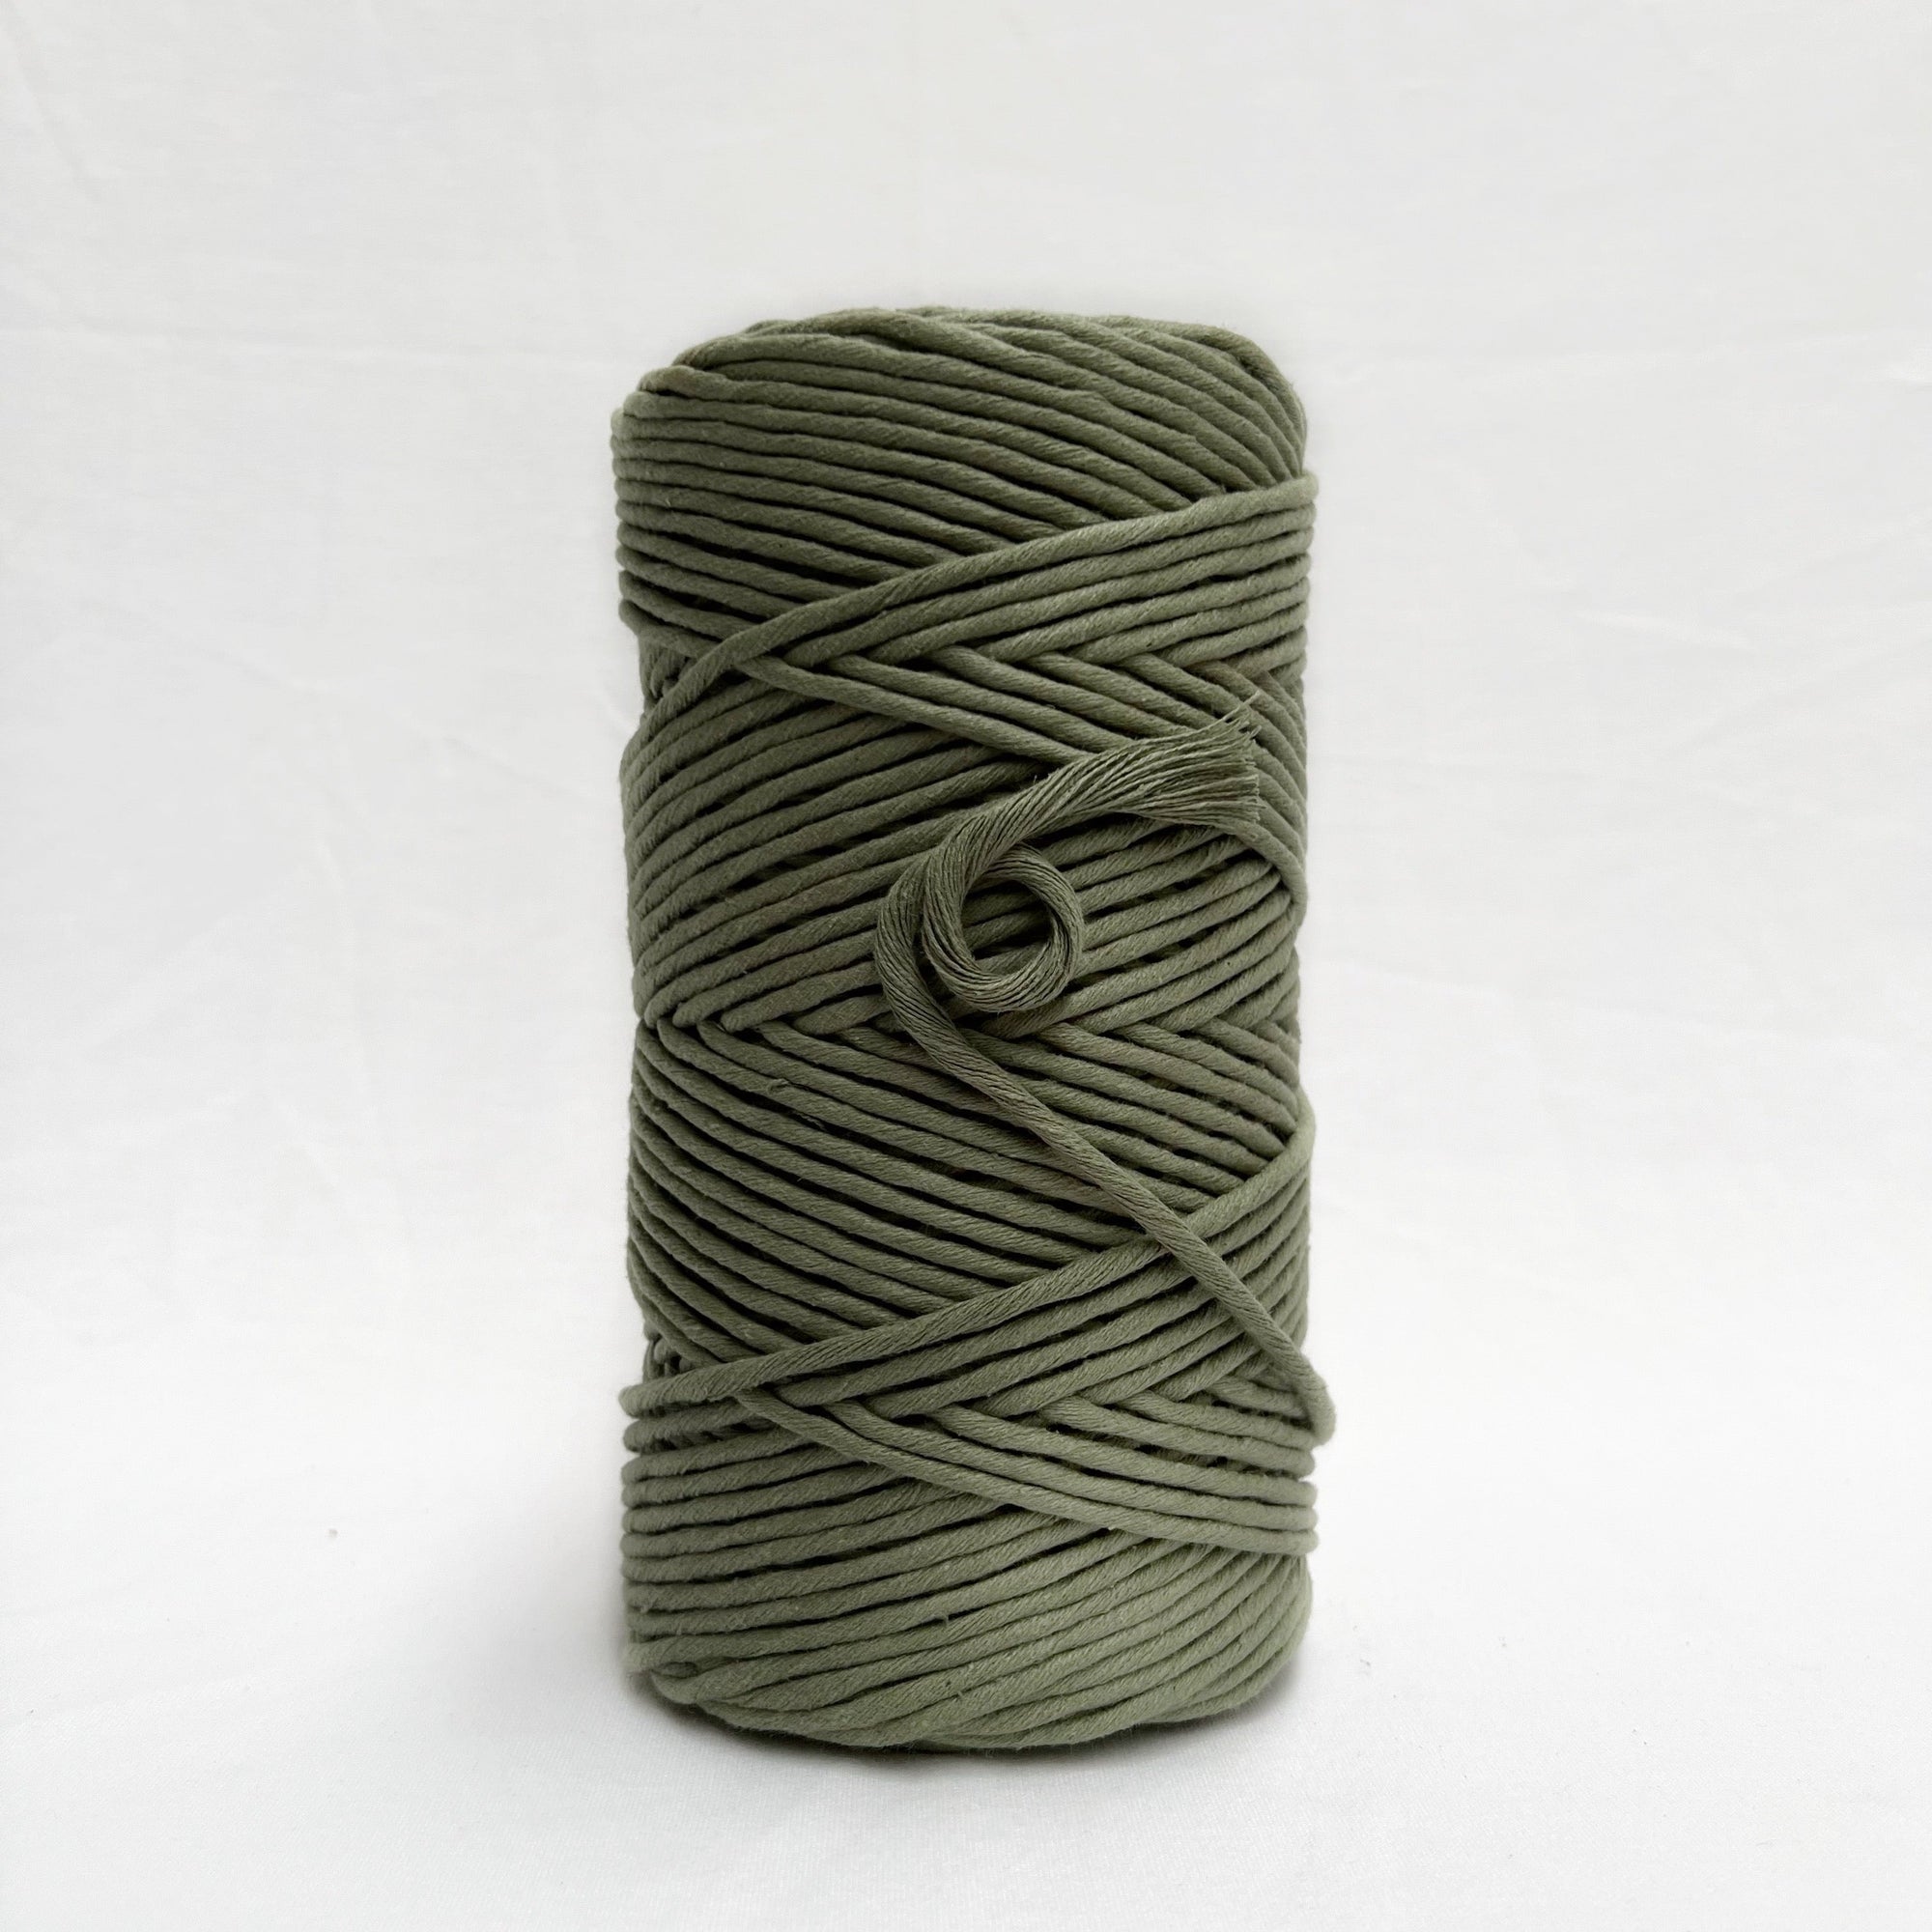 mary maker studio 1kg 5mm recycled cotton macrame string in vintage desert sage colour buy online for macrame workshops beginners and advanced artists